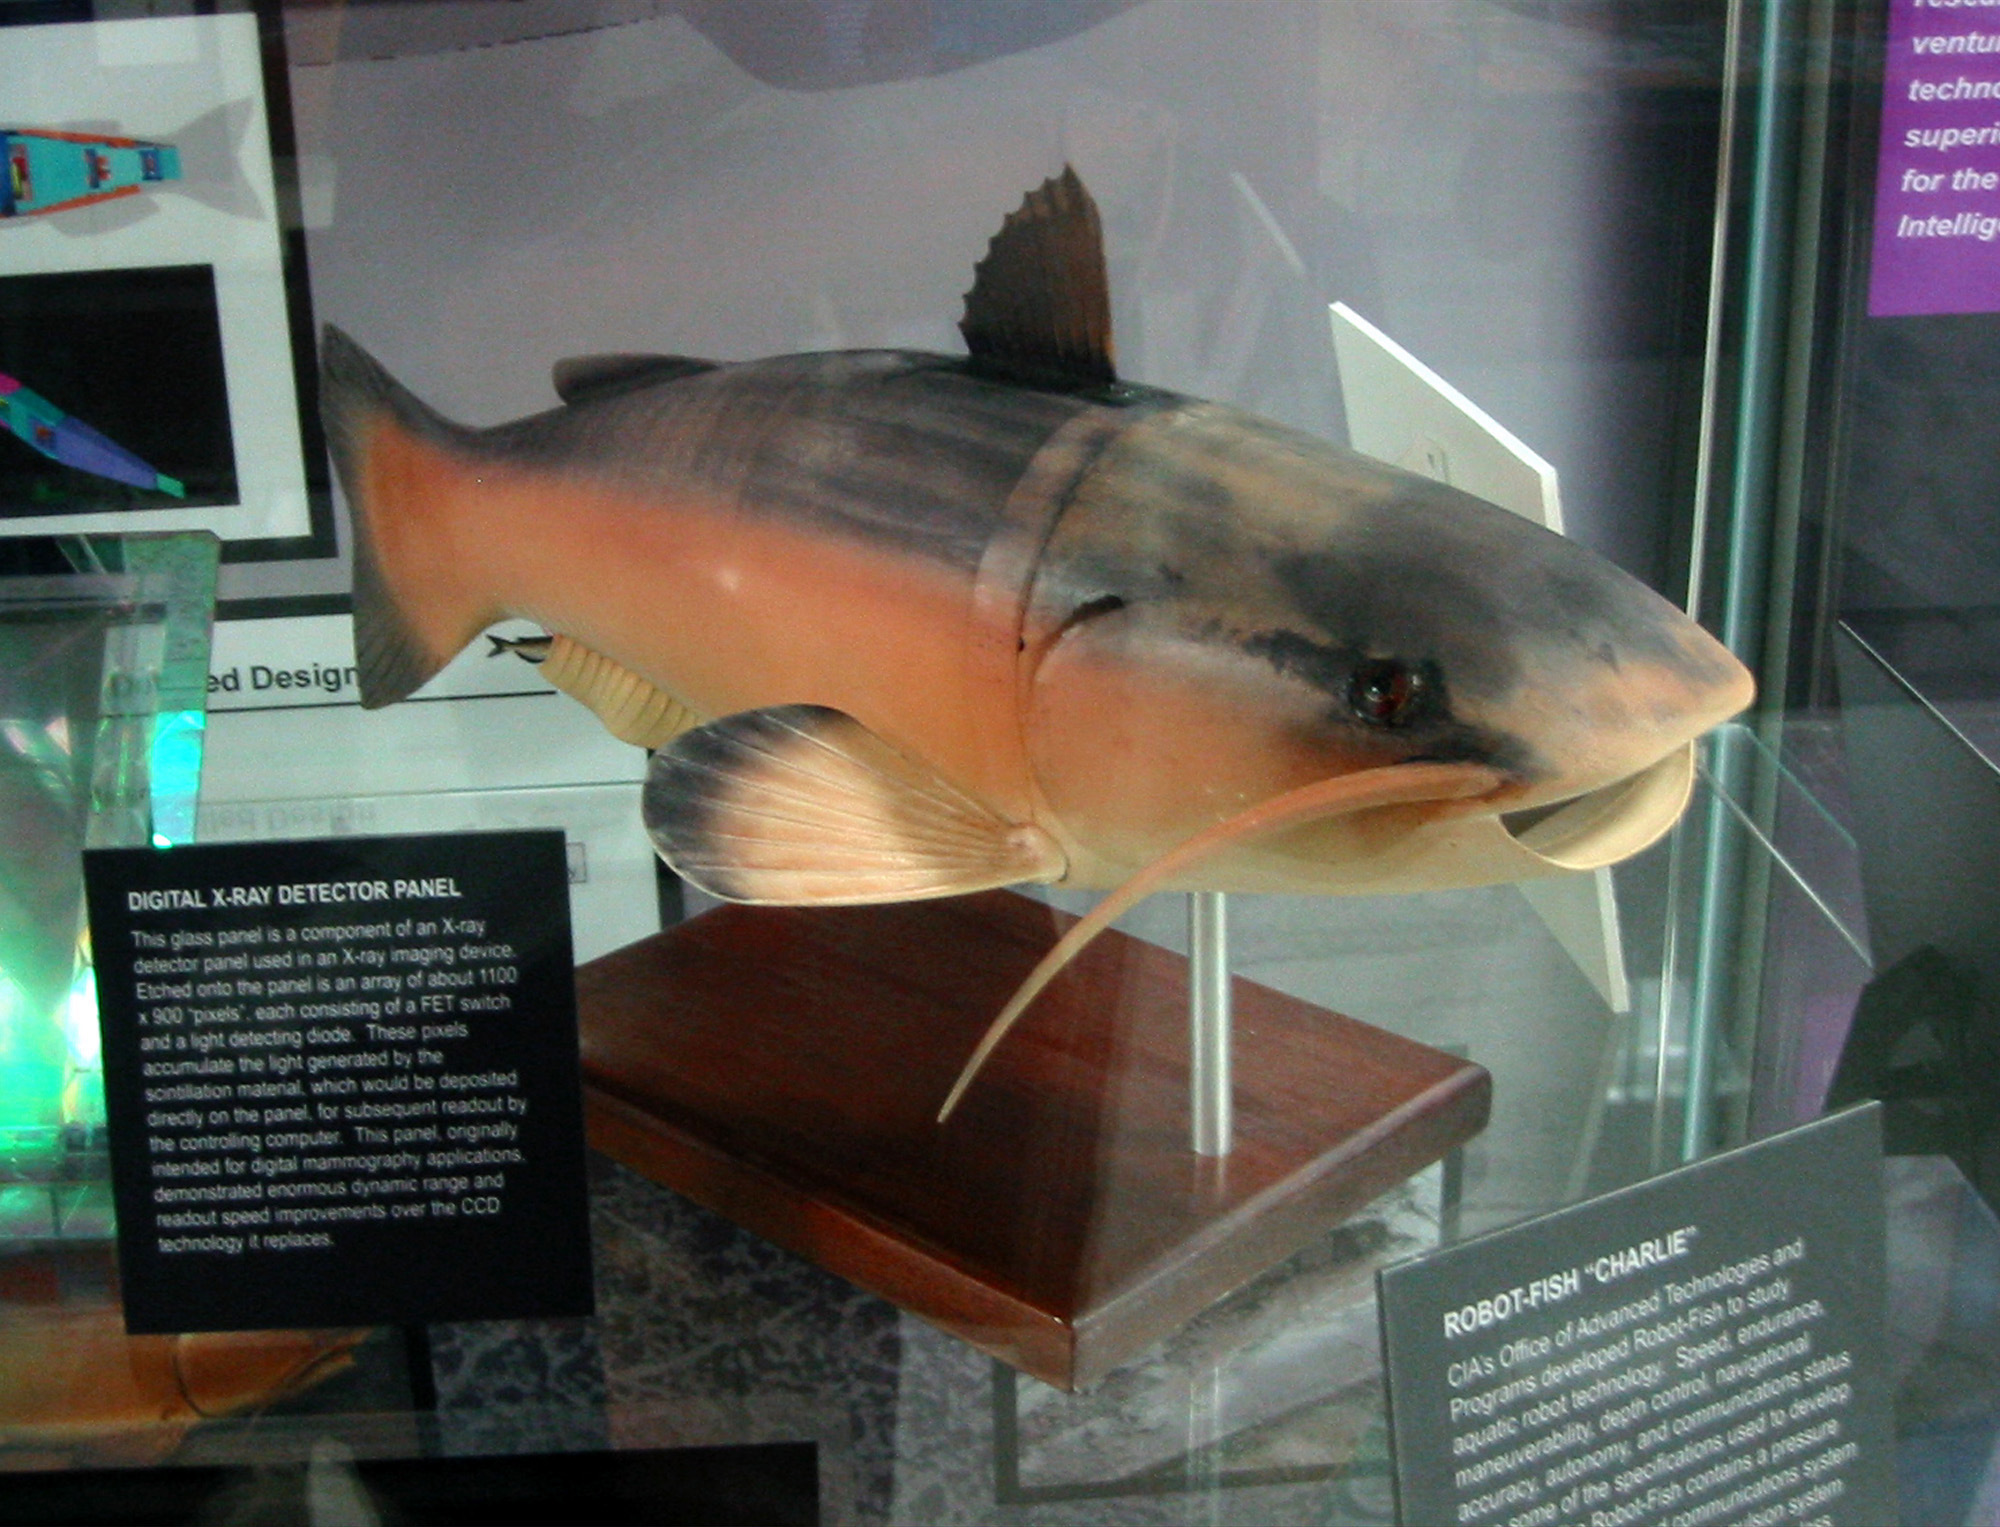 The robot catfish 'Charlie', built in 2000, seen on display at the museum 